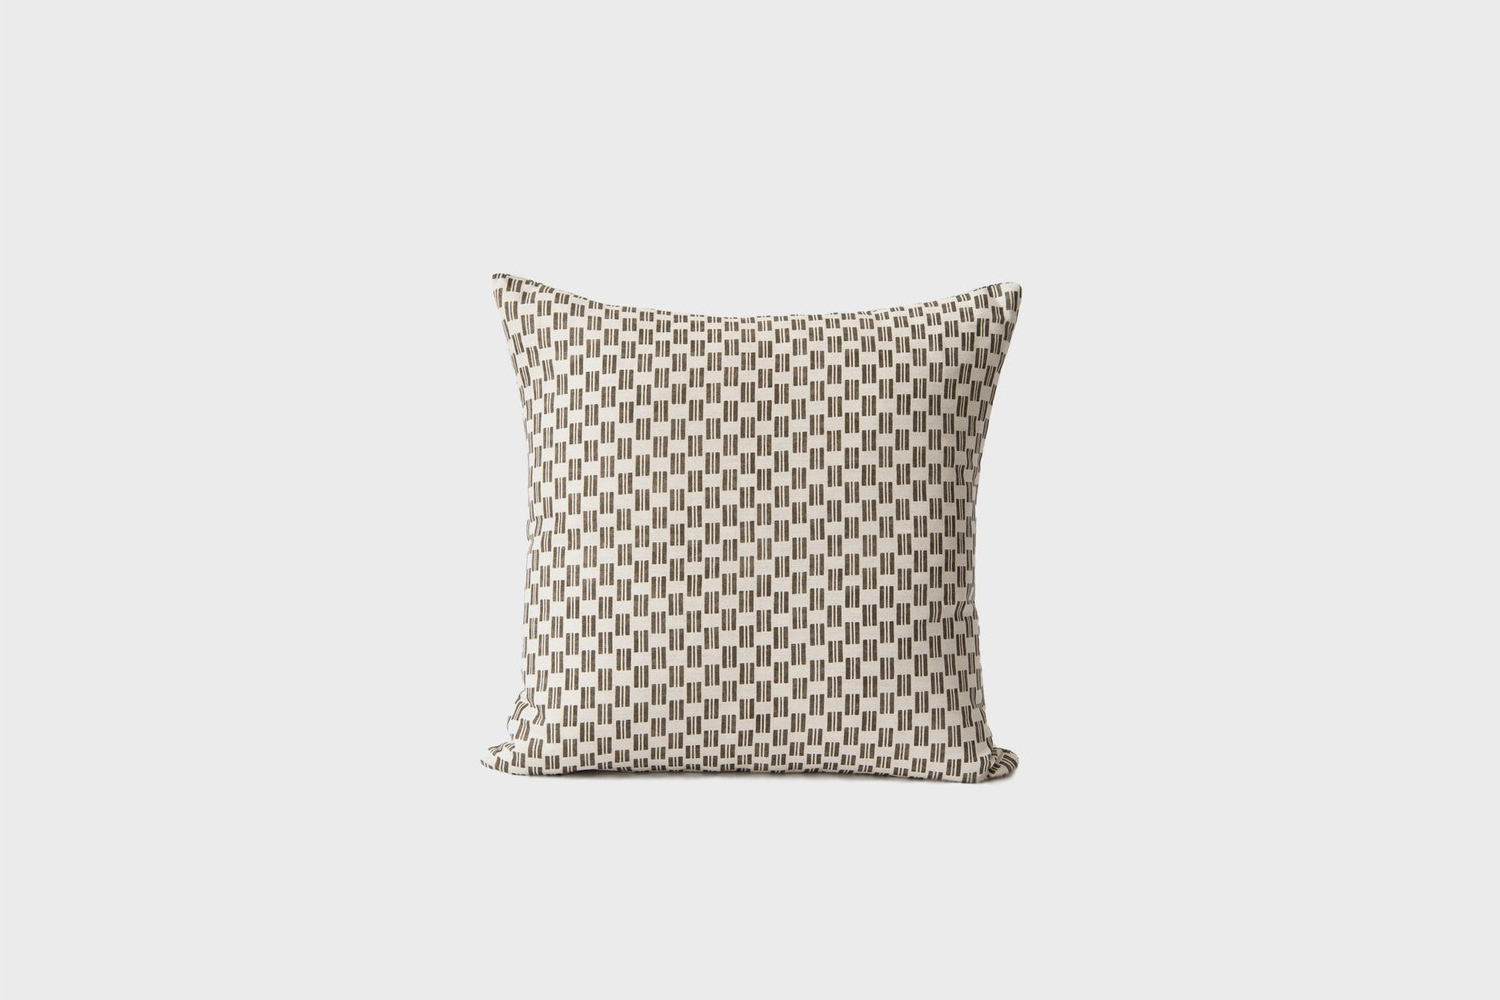 the zak and fox kesa pillow is \$385 at sunday shop. 24